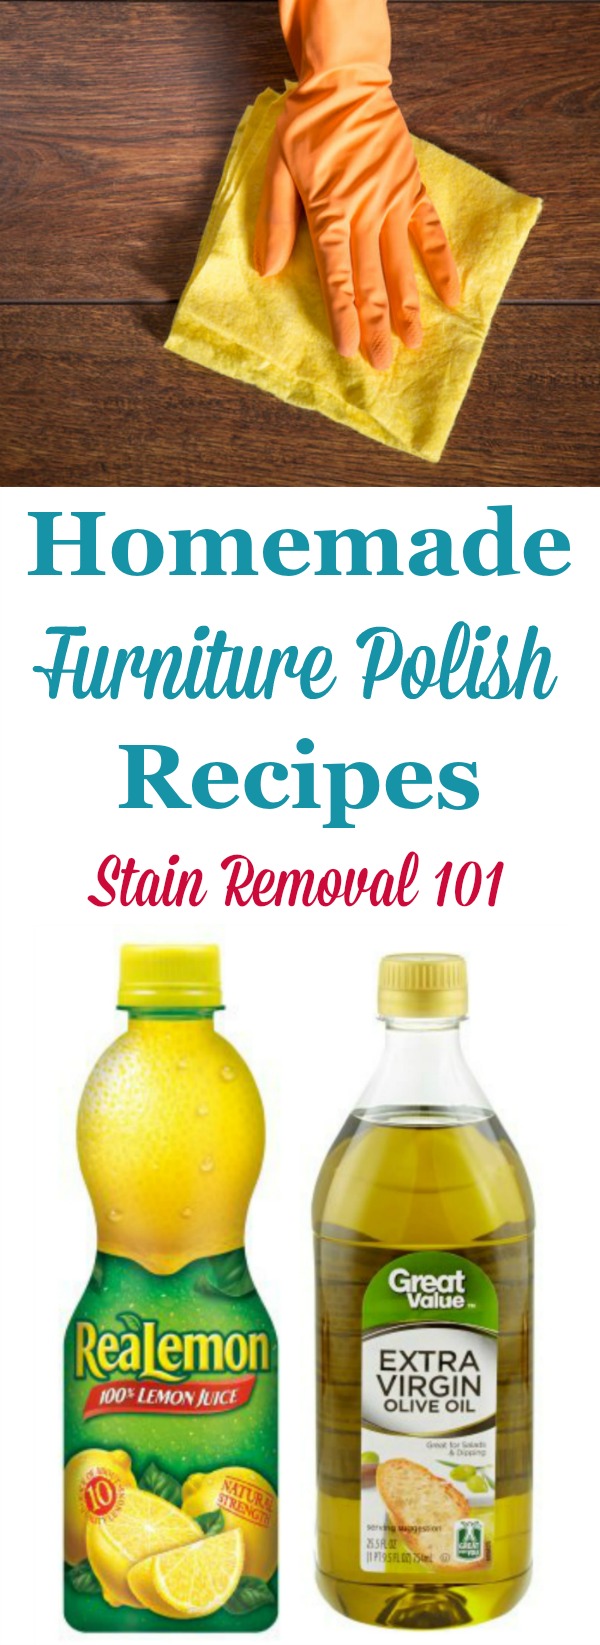 Three natural homemade furniture polish recipes that make wood furniture look great for less {on Stain Removal 101} #HomemadeFurniturePolish #NaturalFurniturePolish #HomemadeCleaningProducts